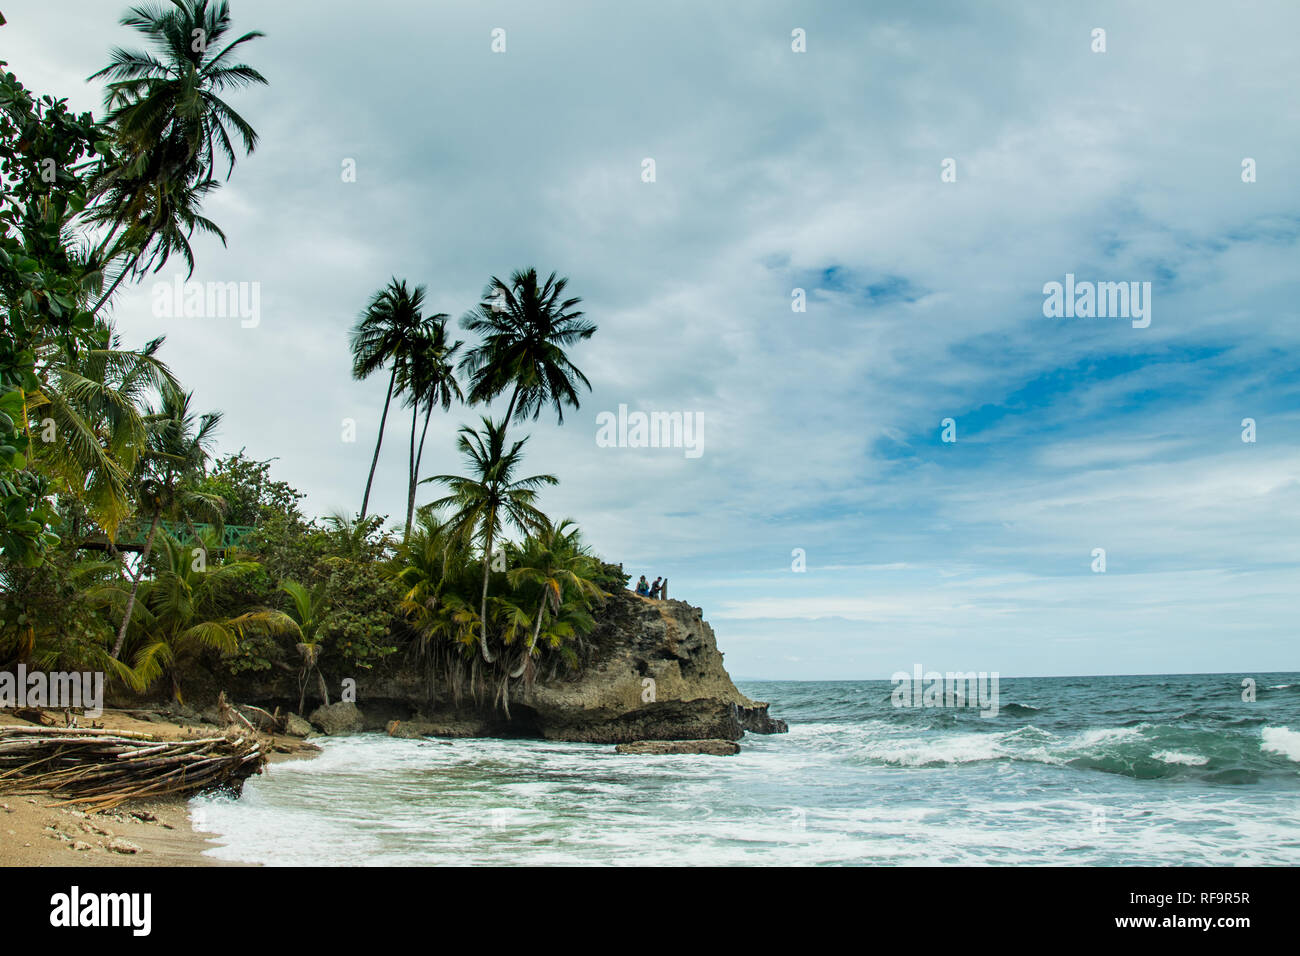 A landscape photo of beautiful tropical coast line (with palm trees and sandy beach) of Manzanillo National park, Costa Rica. Stock Photo